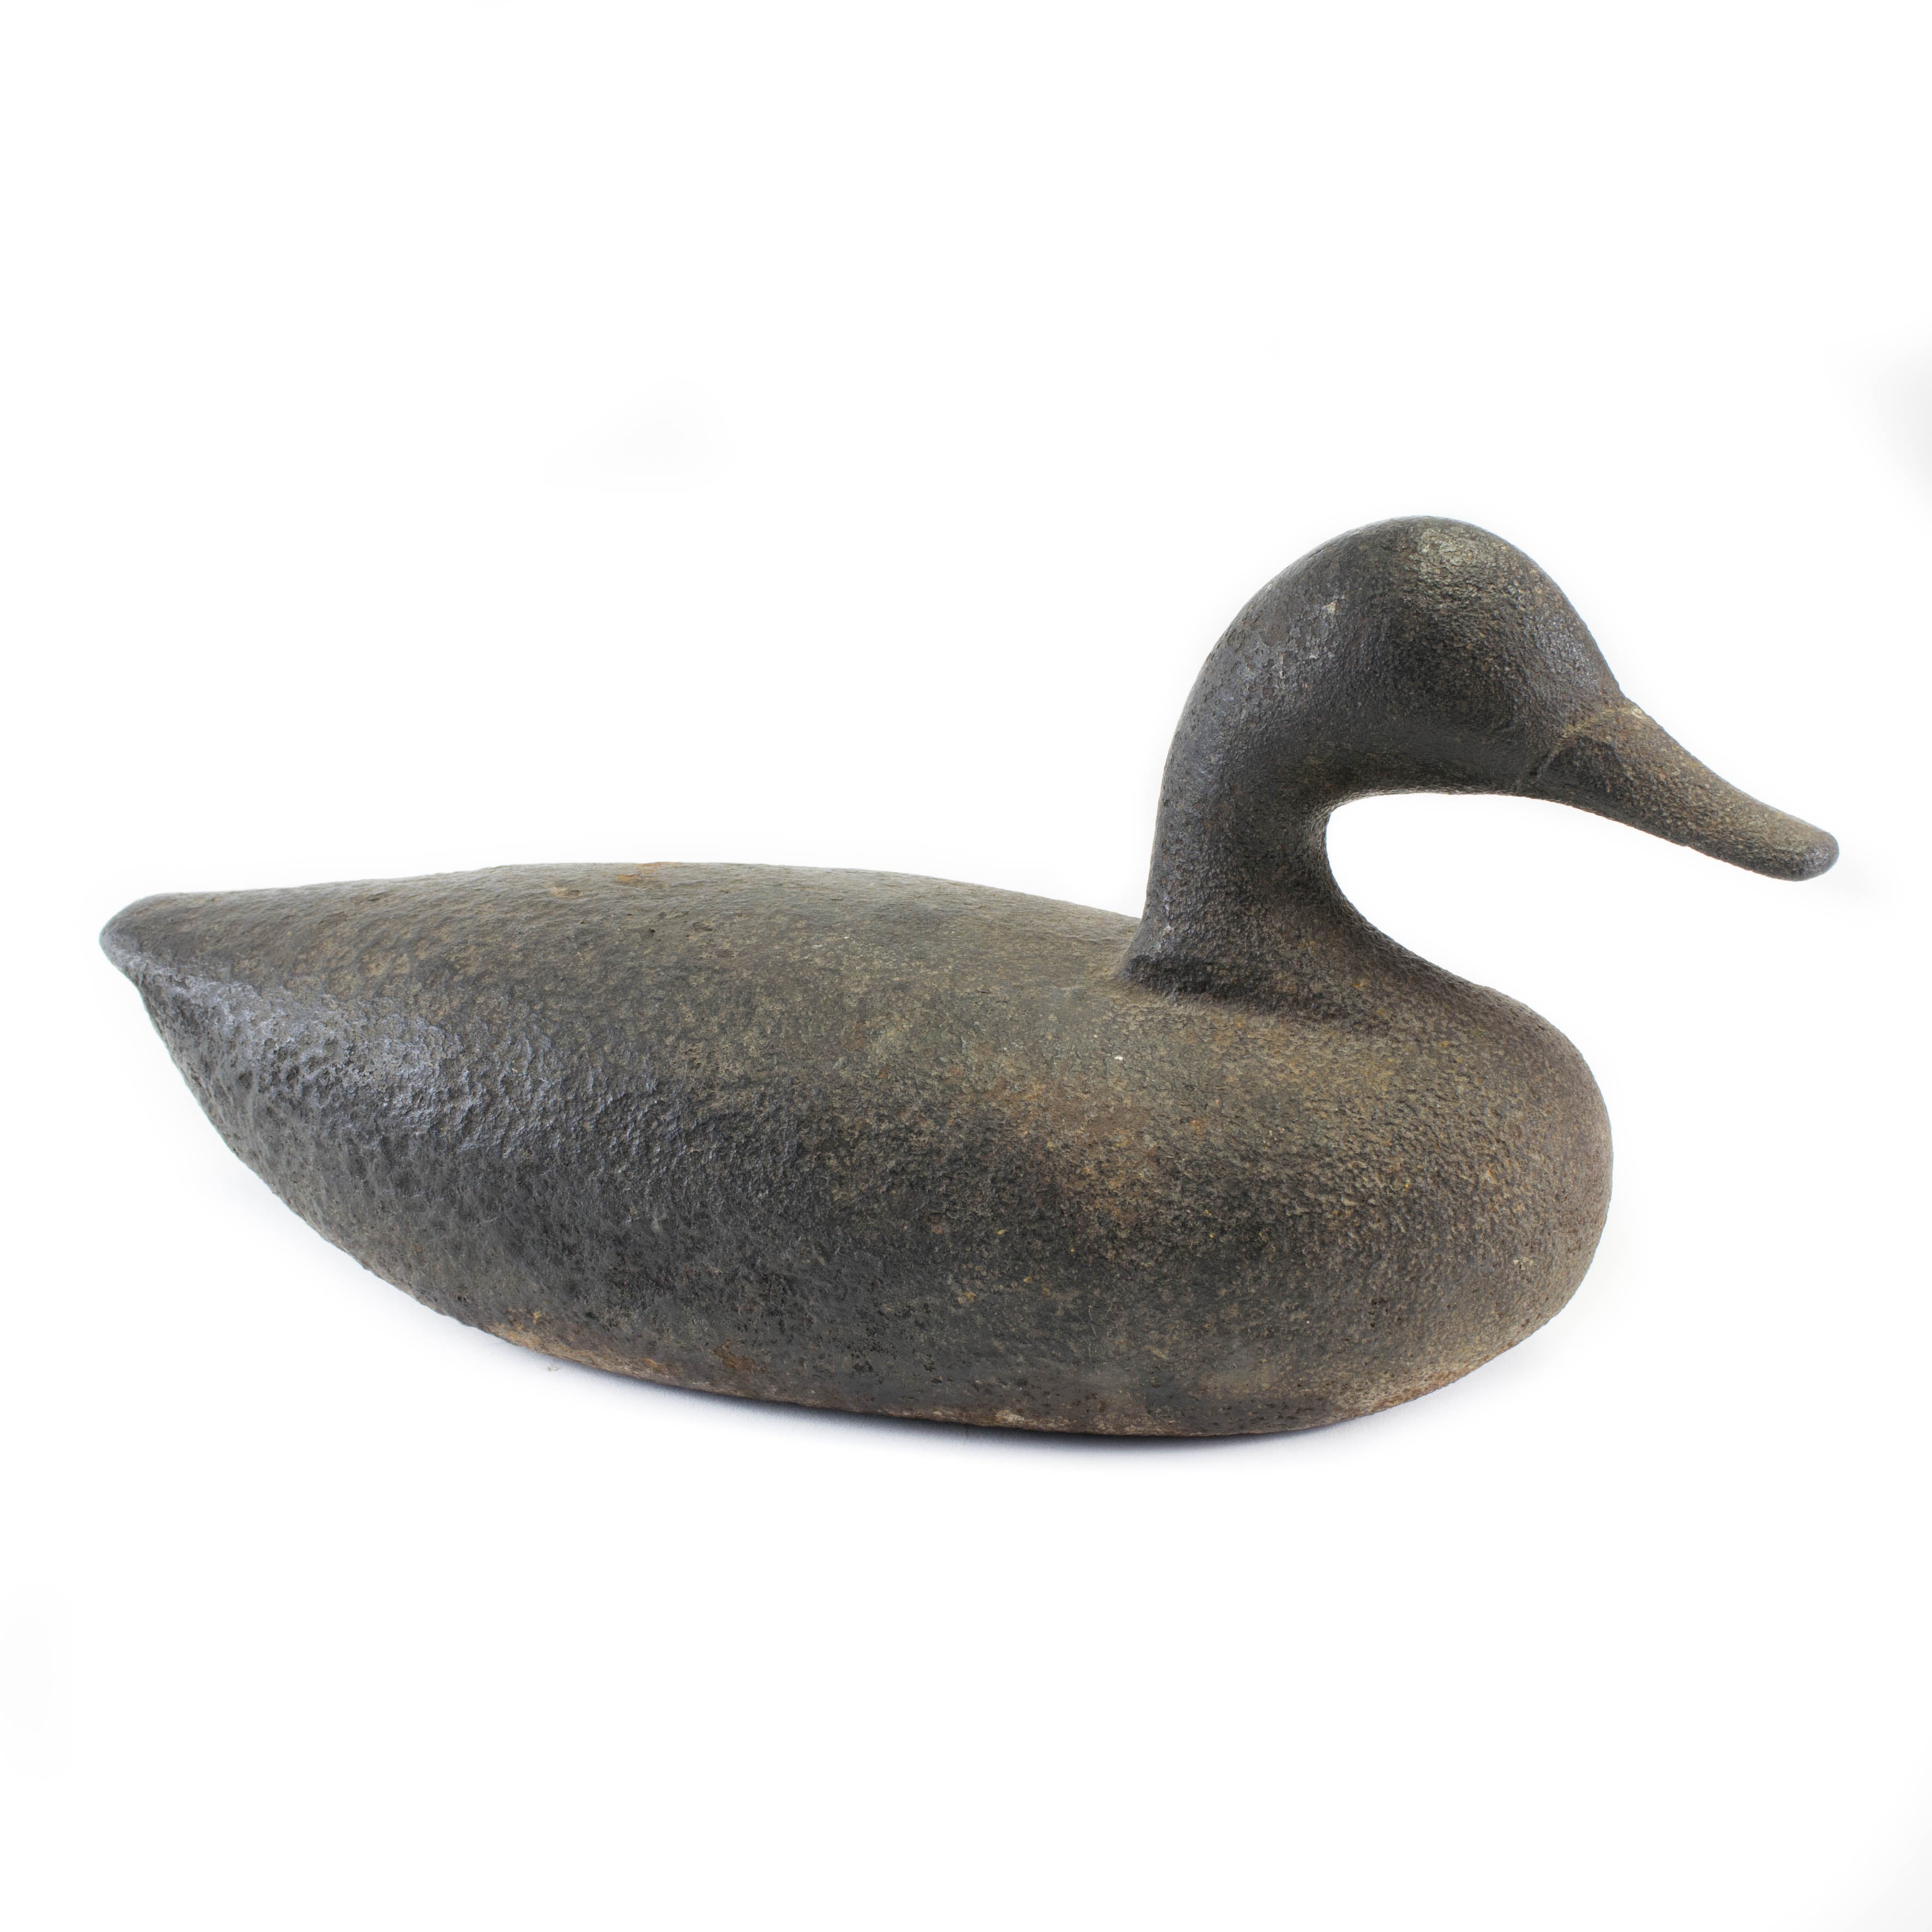 Weighs 45 Pounds, Sporting Goods, Hunting, Waterfowl Decoy